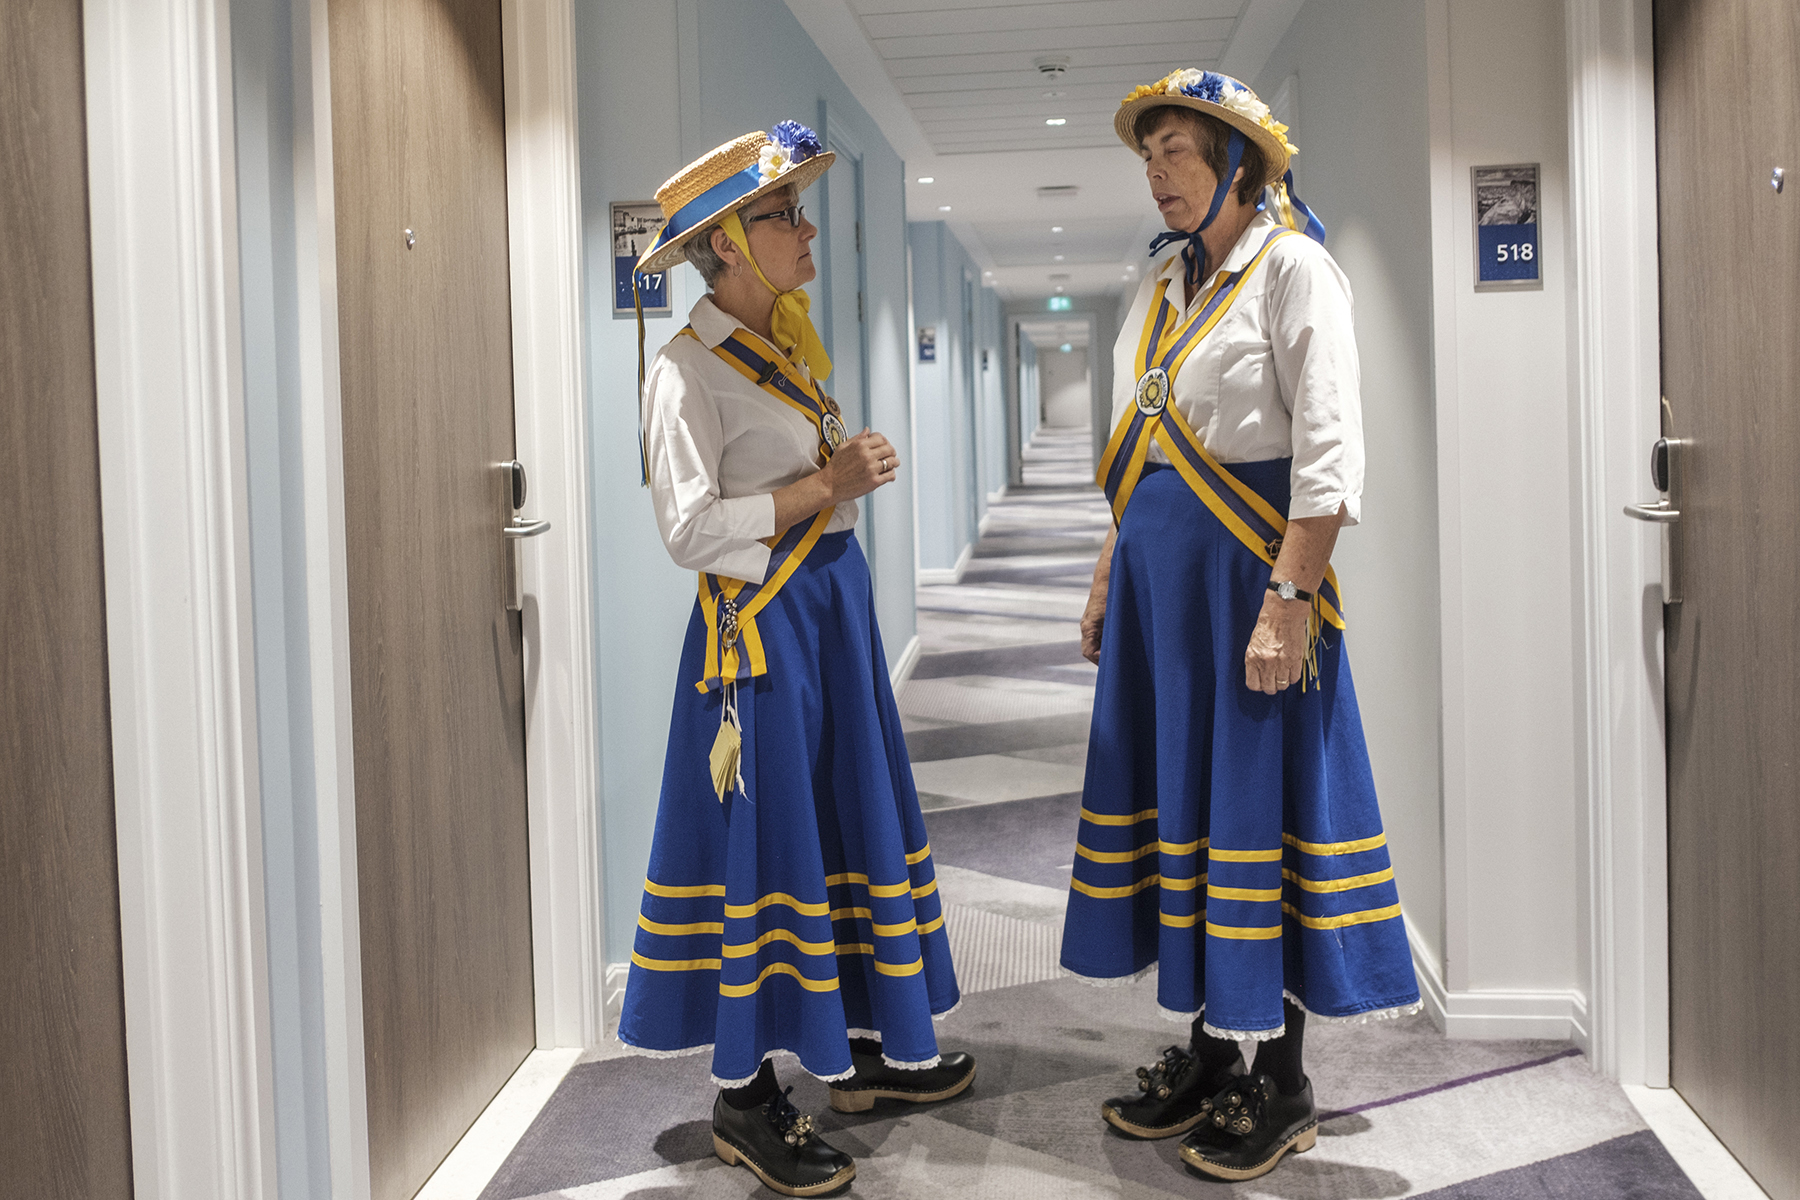 Morris dancers Sylvia and Ruth are captured in Weldon’s series